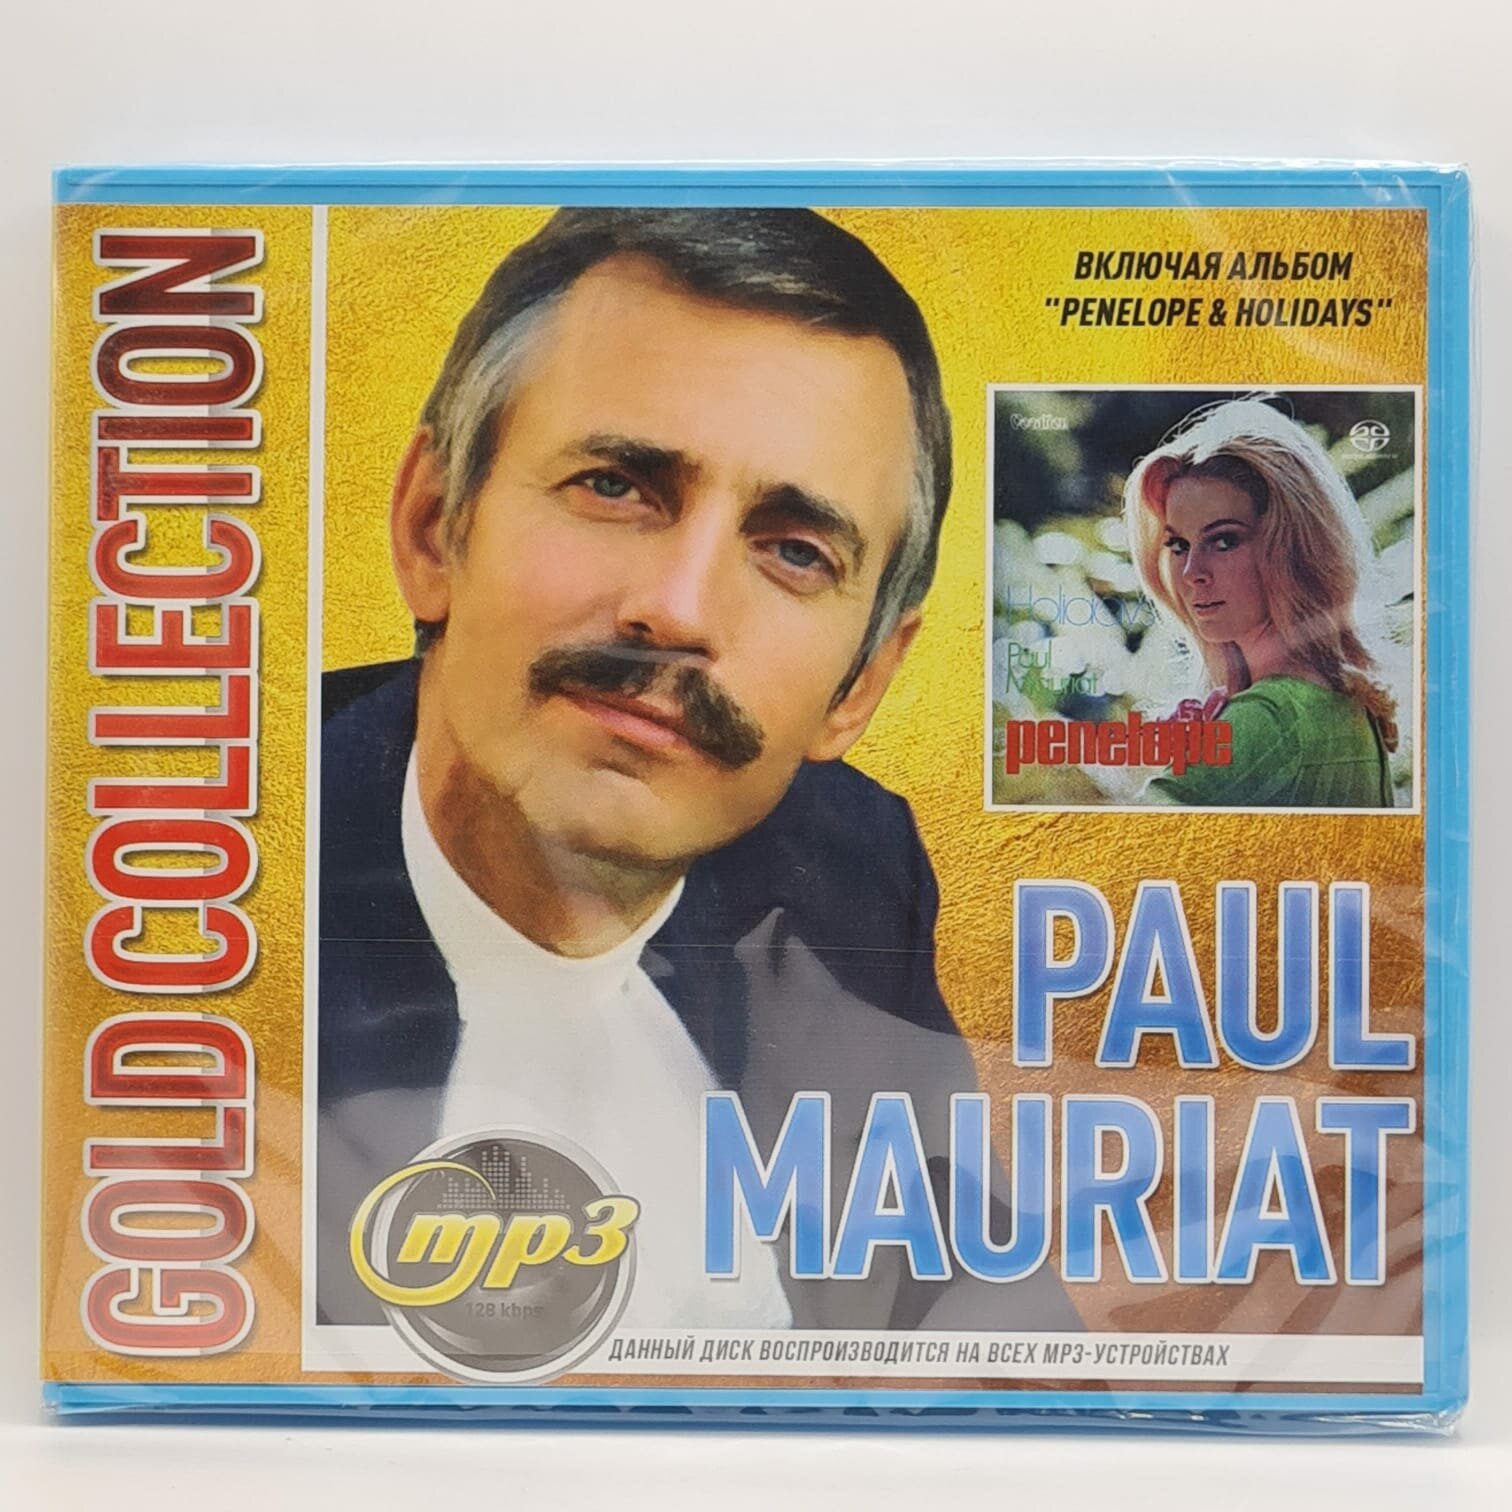 Paul Mauriat - Gold Collection (MP3)